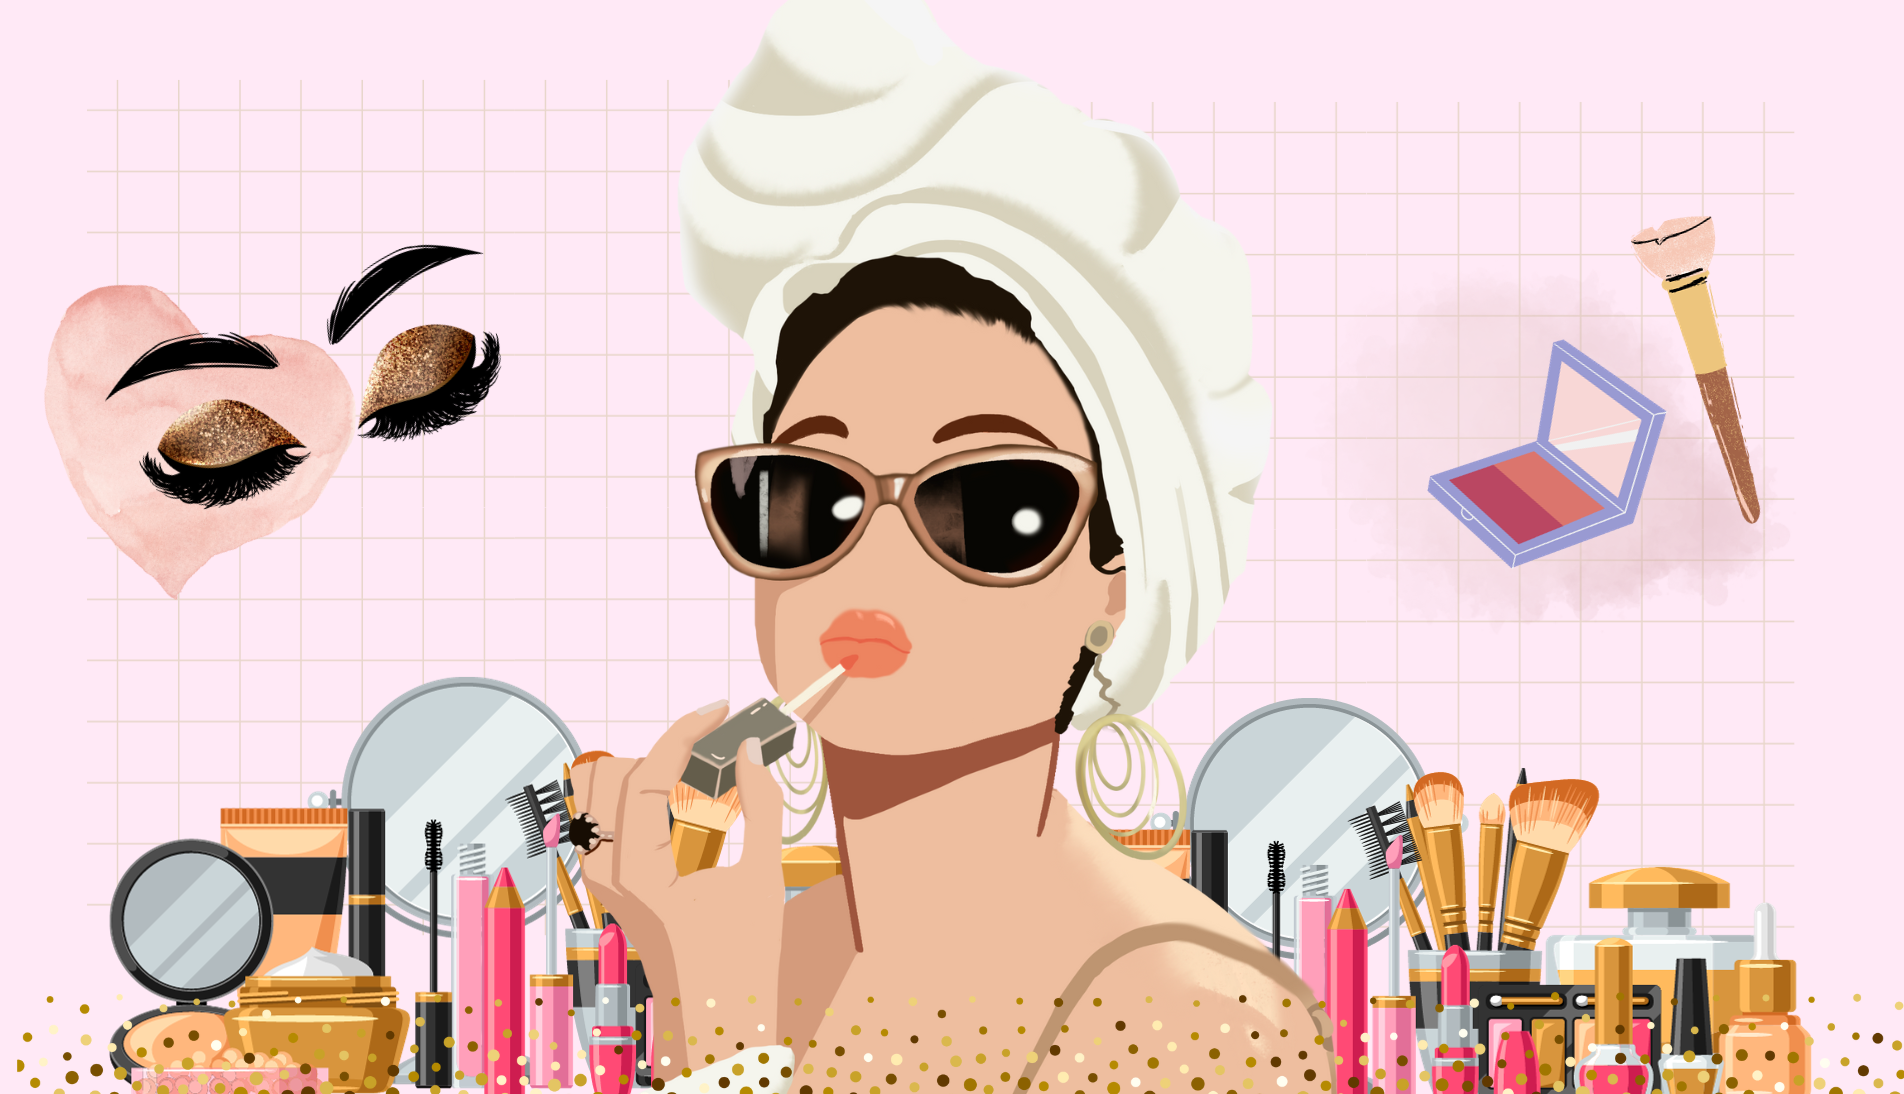 Illustration of various makeup products suitable for beginners.